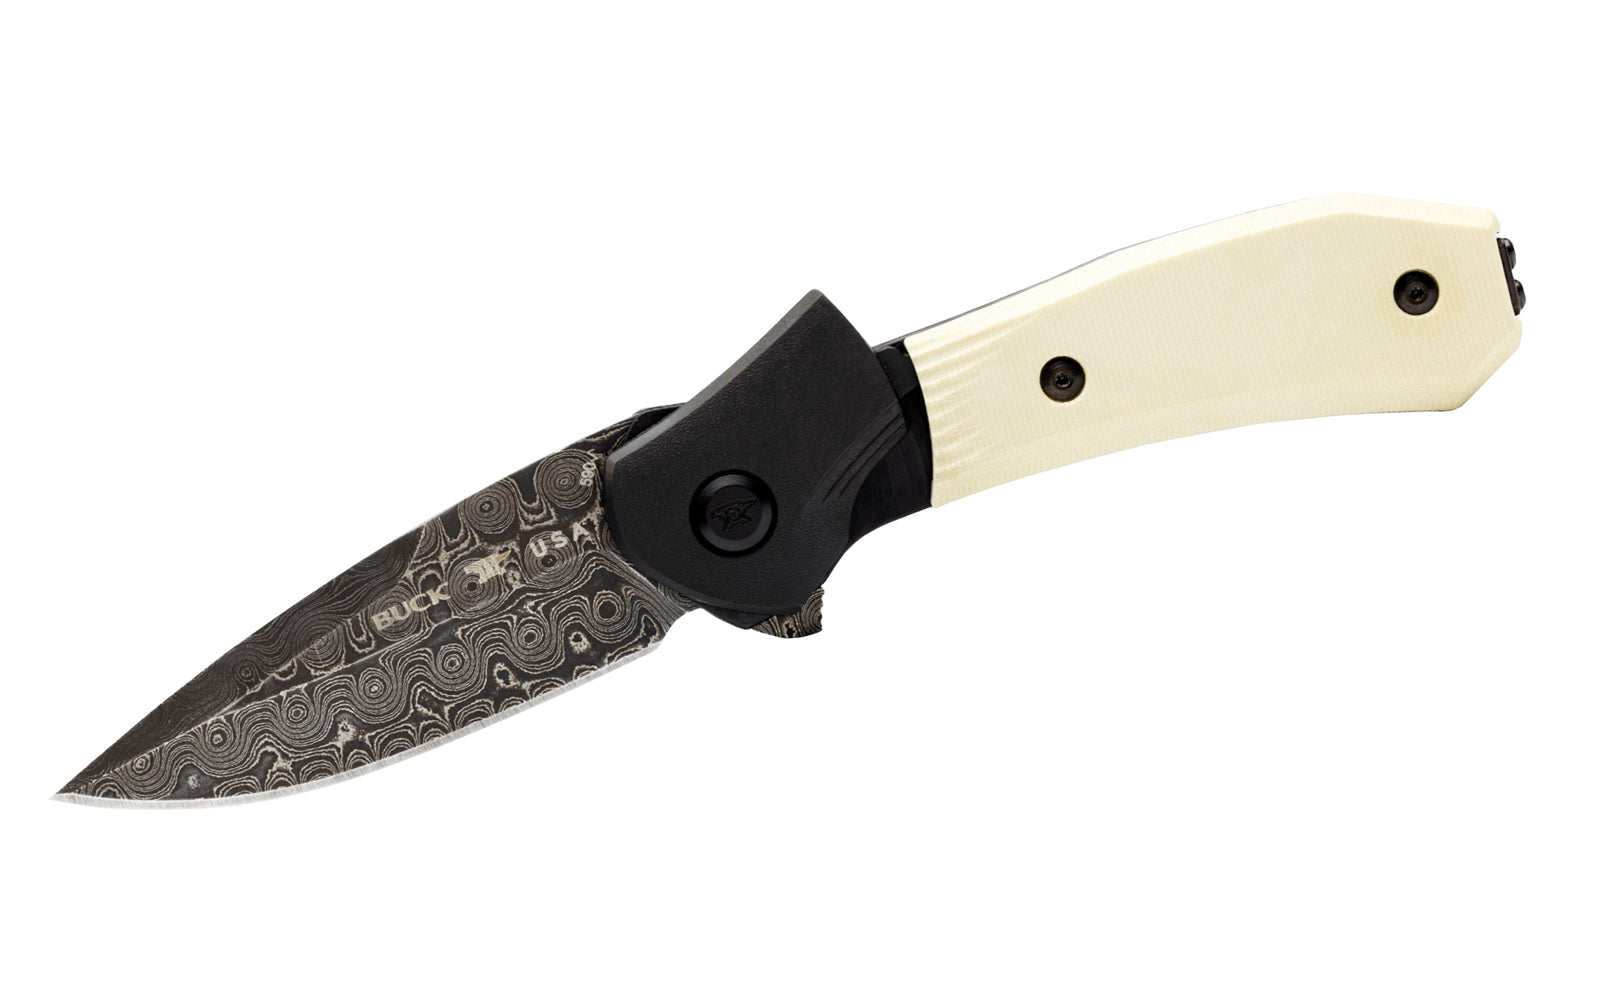 Buck Knives 590 Paradigm Folding Knife with Damascus Steel. Blade has raindrop pattern Damascus steel. 3" long blade. "Ivory G10" handle with DLC coated bolsters. Model 0590IVSLE-B. Pocket clip attached.  Made in USA. 